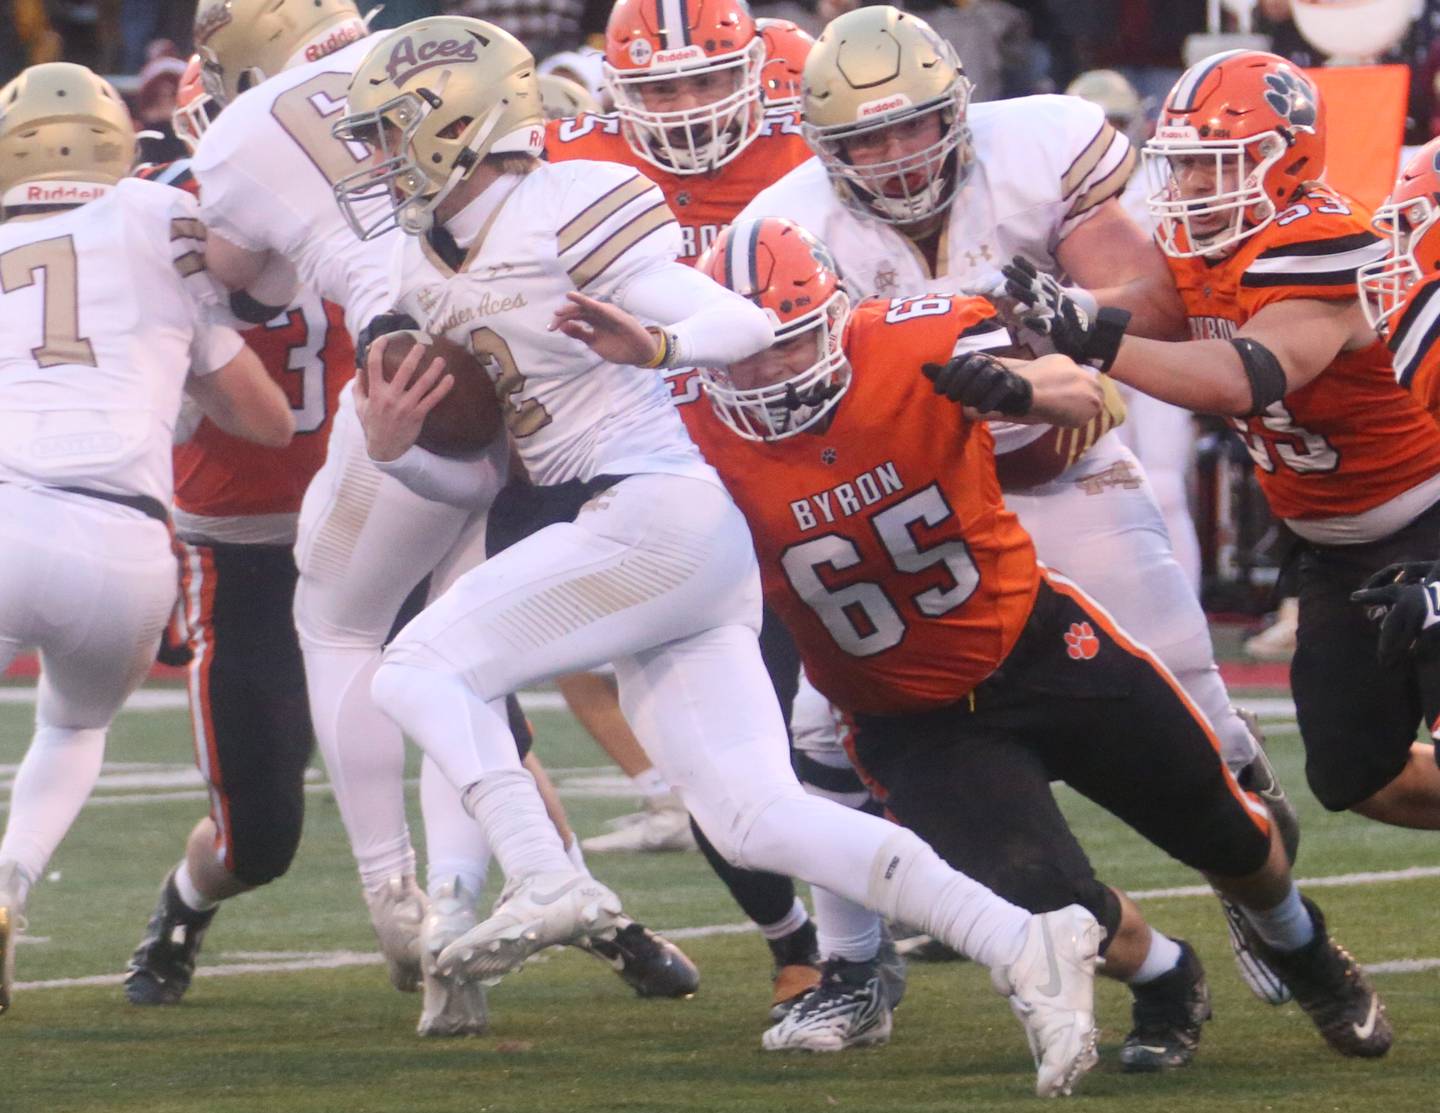 Mt Carmel's Blayne Sisson runs the ball as Byron's Jared Claunch makes the tackle during the Class 3A State football championship on Friday, Nov, 24, 2023 at Hancock Stadium in Normal.